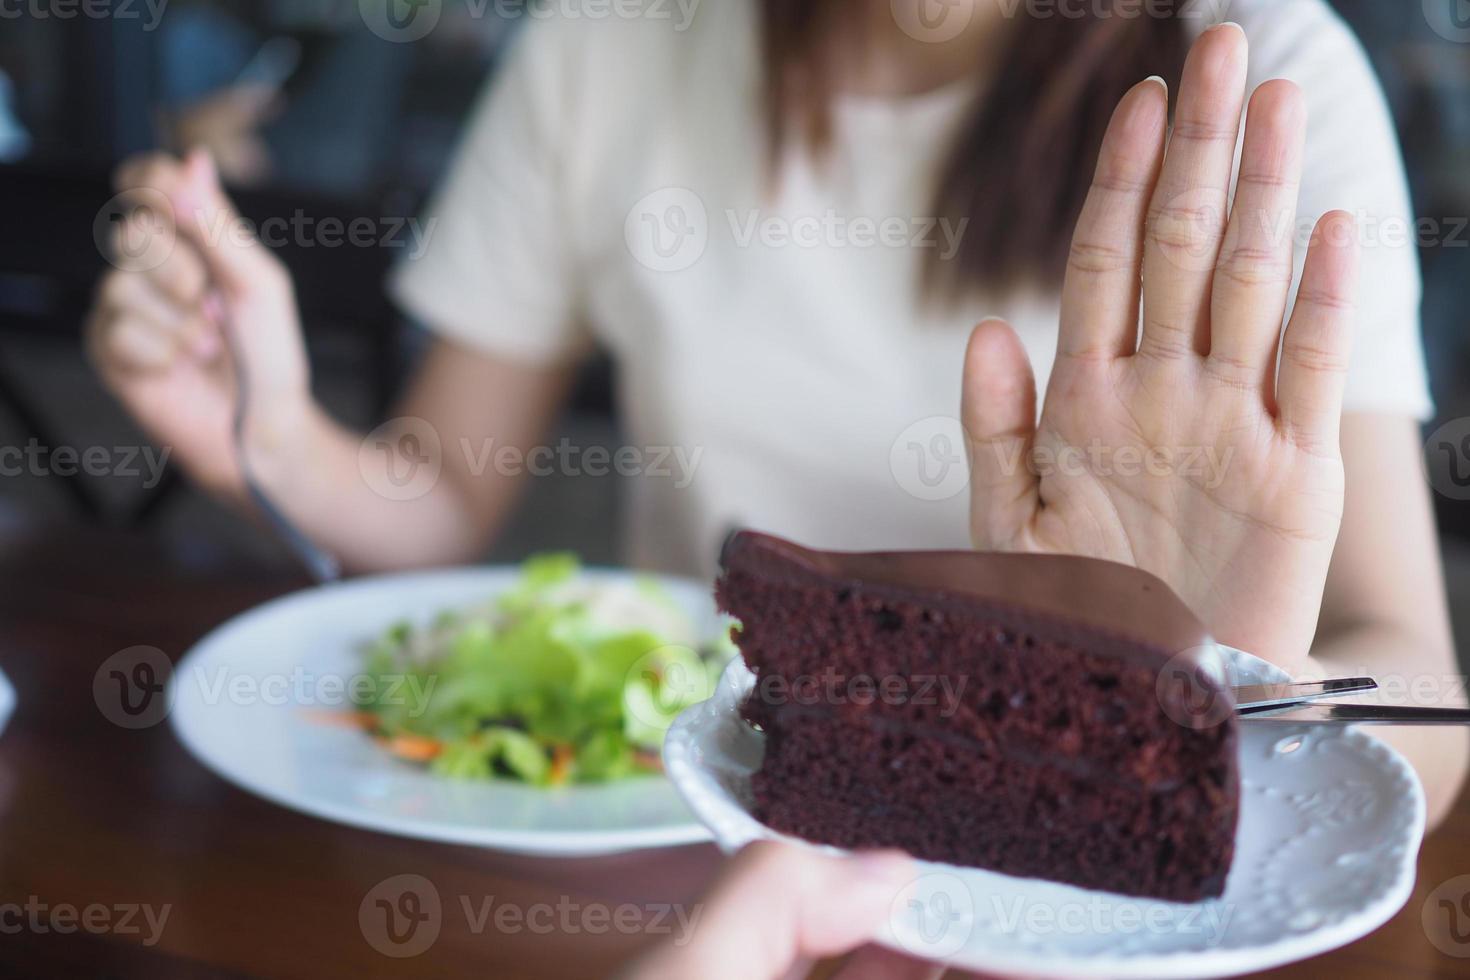 The girl is pushing the chocolate cake out. And choose to eat salad vegetables placed in front. The goal is to lose weight and eat healthy food. photo